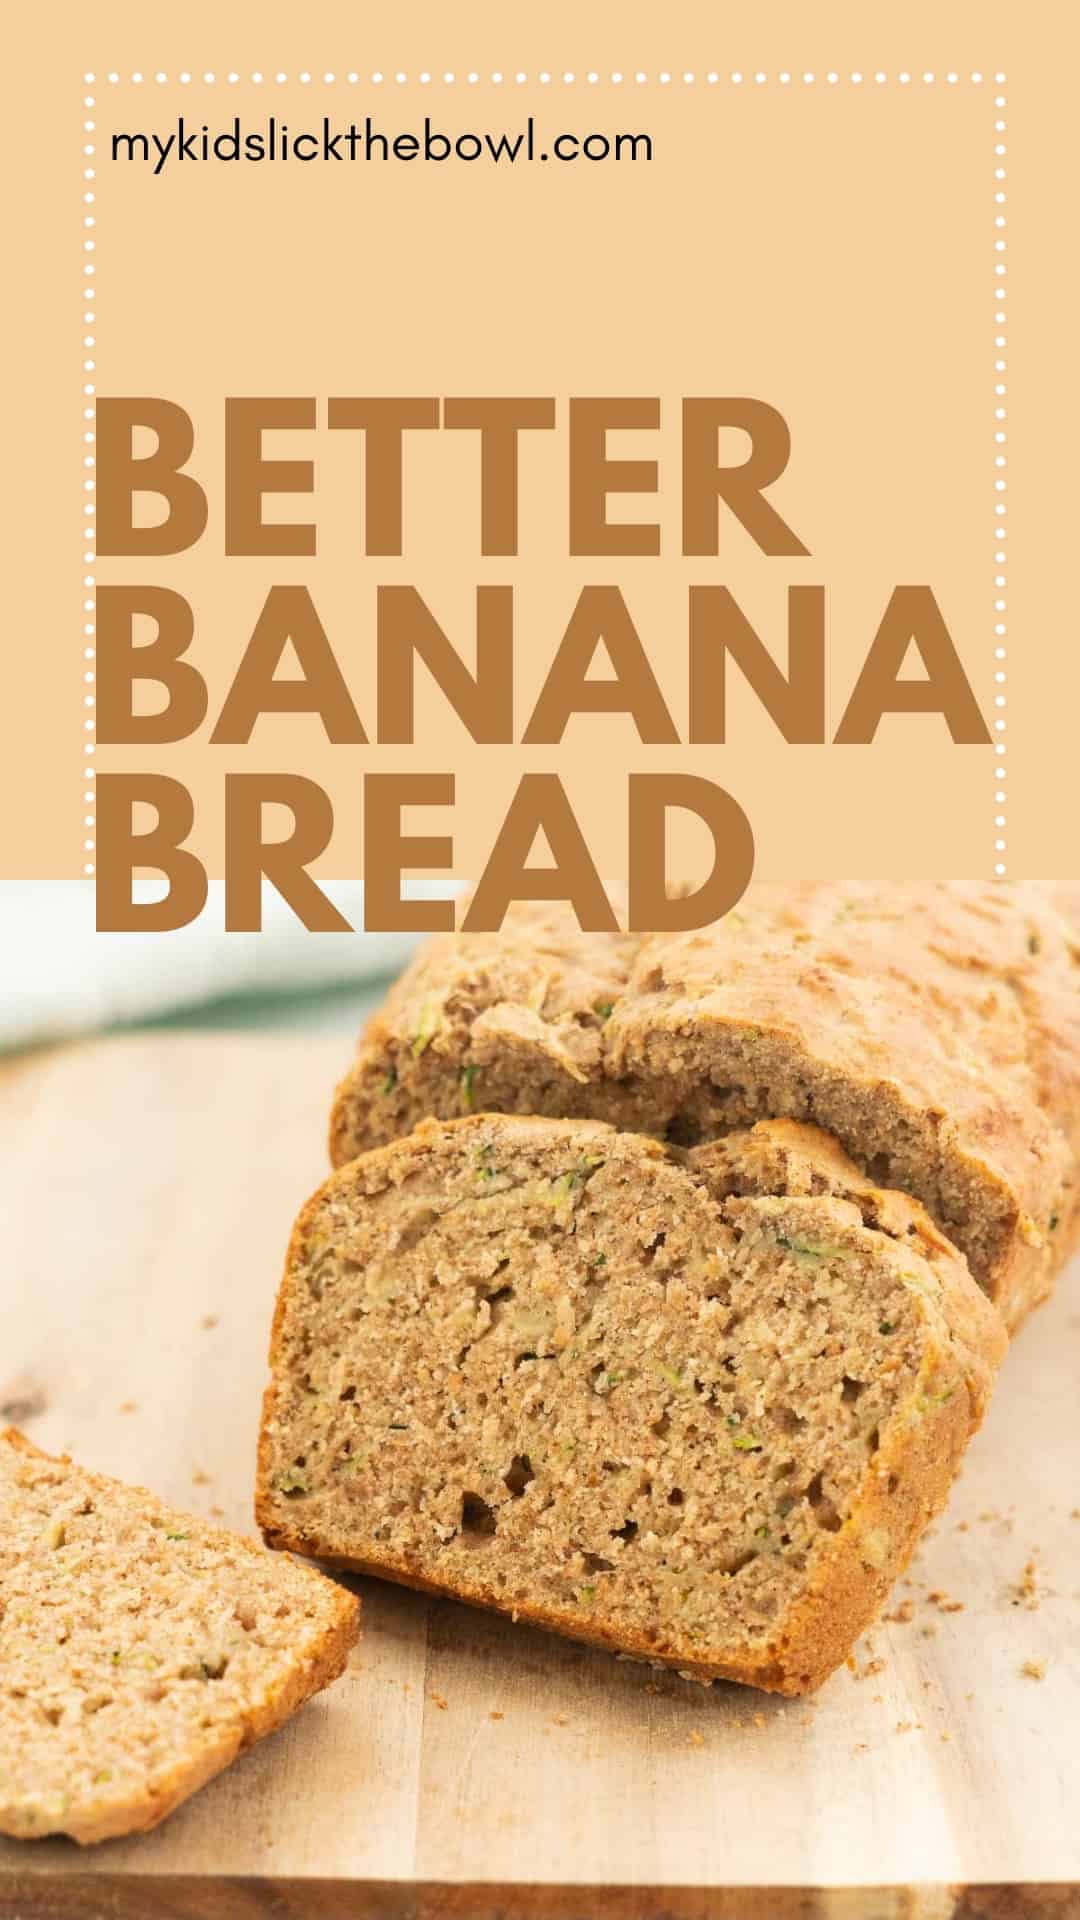 photo of banana bread on a wooden board with text overlay 'better banana bread'.